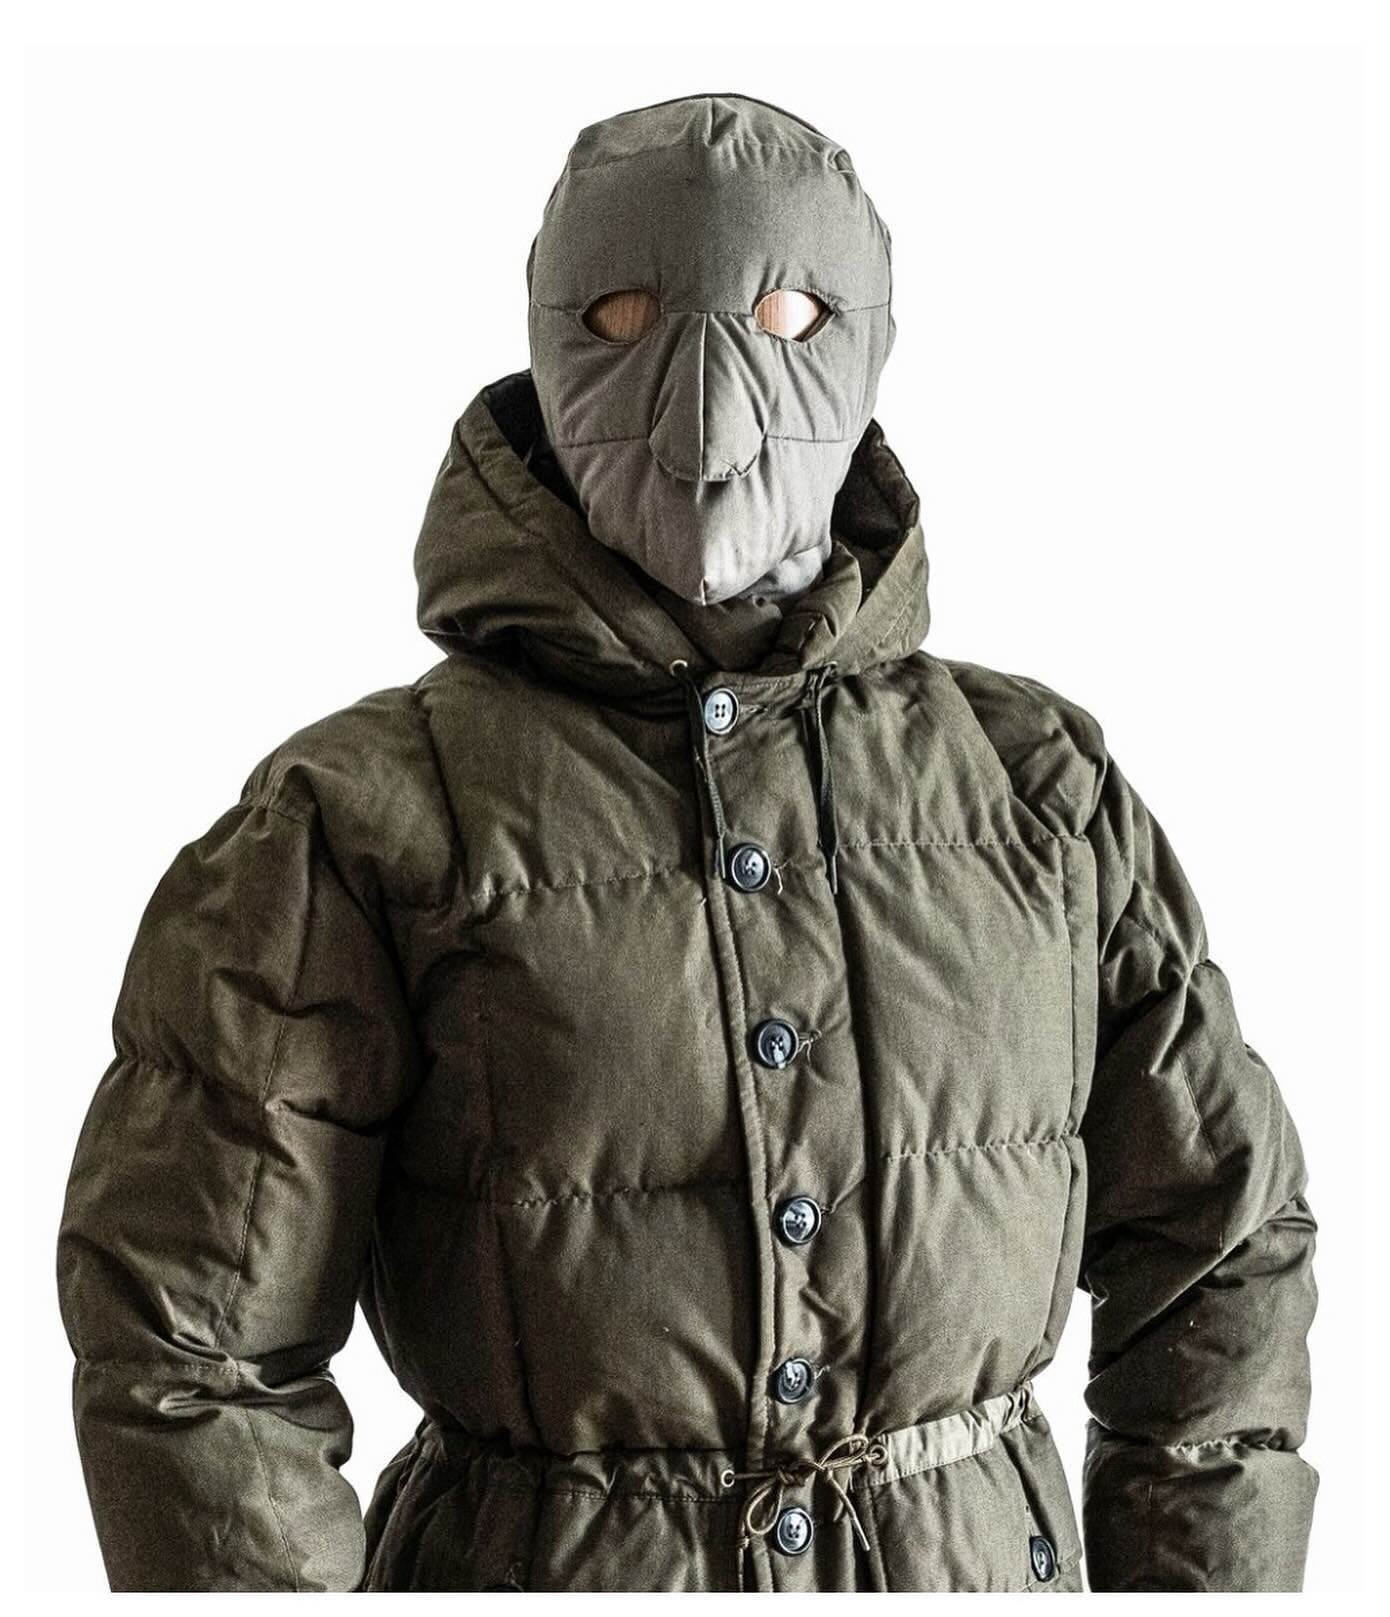 For Sale (Edit: Mask Sold). Loads of fine vintage outerwear added to the website including this deadstock/ mint/ horrifying/ incredible Eddie Bauer goose down balaclava. The Olive Drab Kara Koram parka is also available. Saundersmilitaria.com